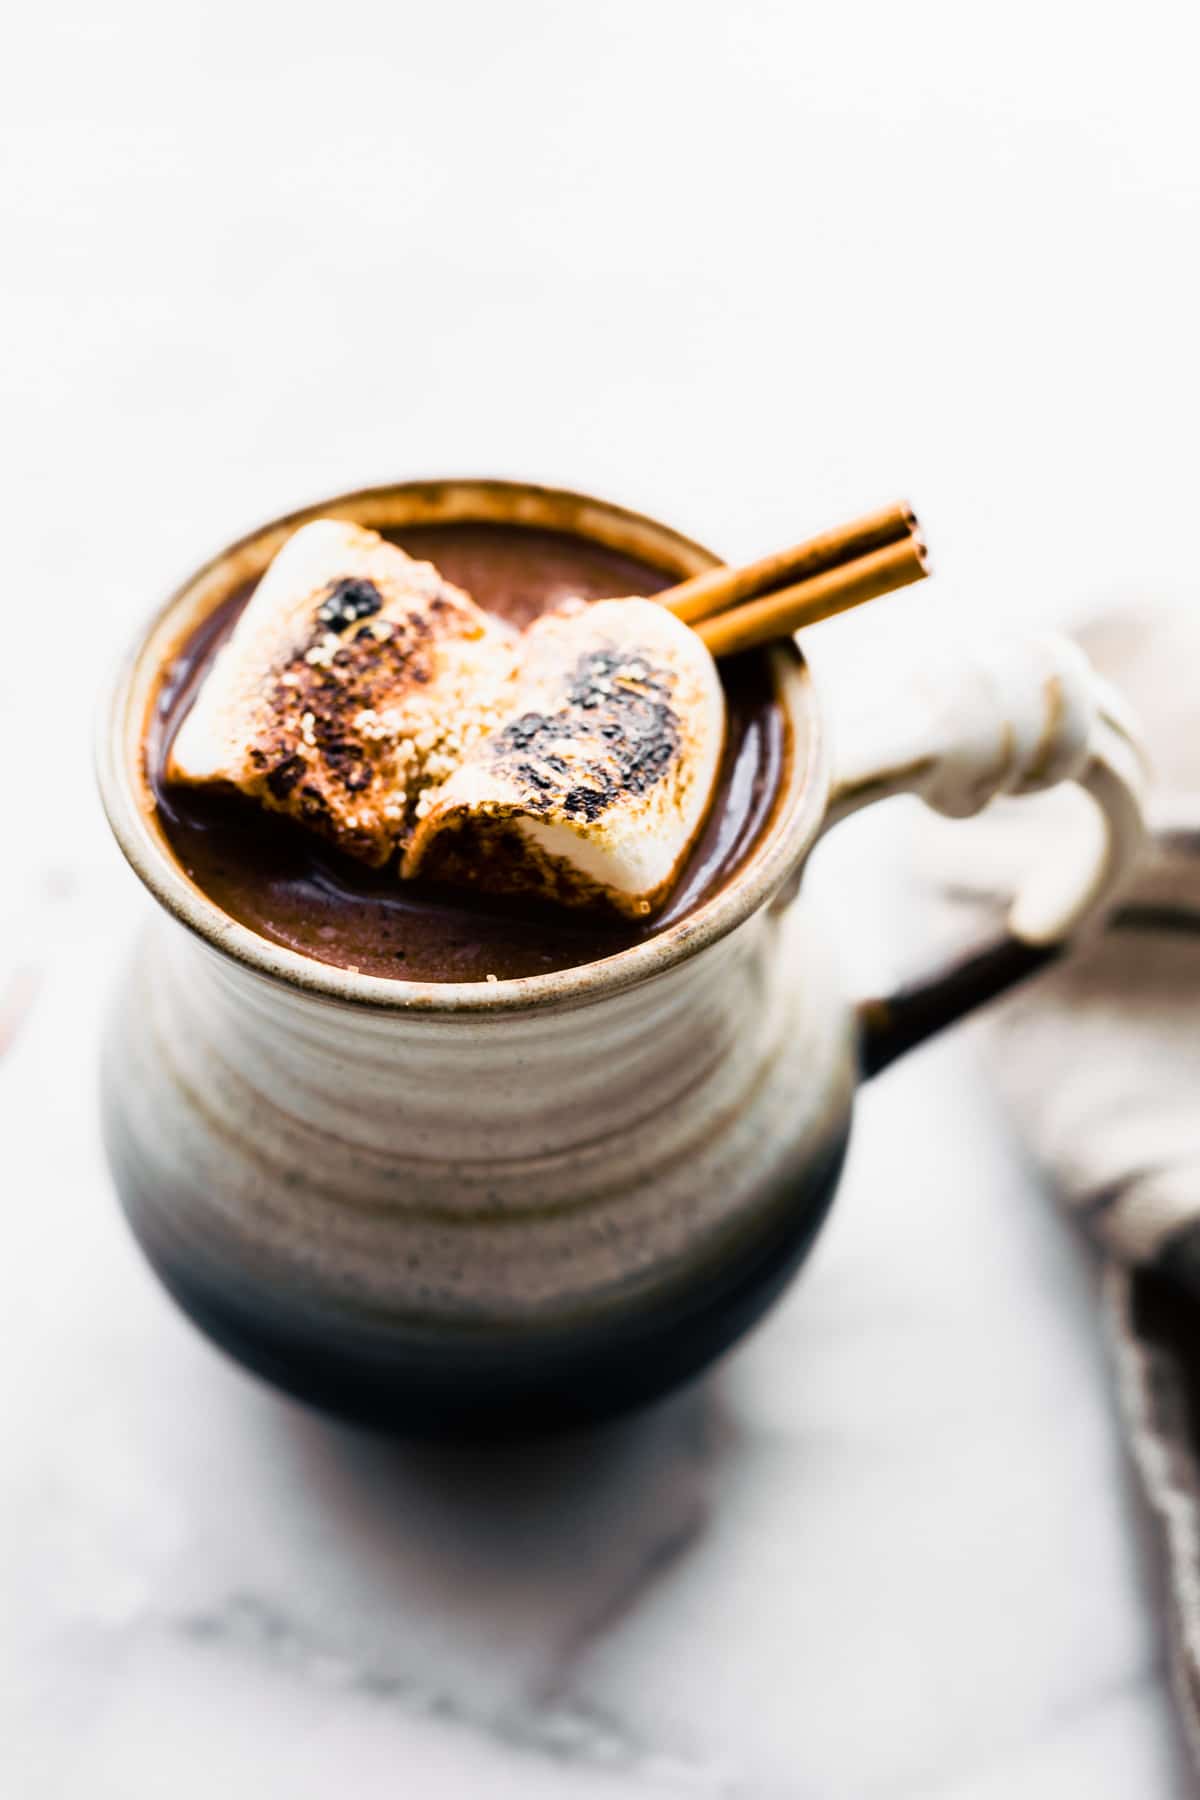 Mexican hot chocolate cocktail in a mug garnished with cinnamon stick and toasted marshmallows